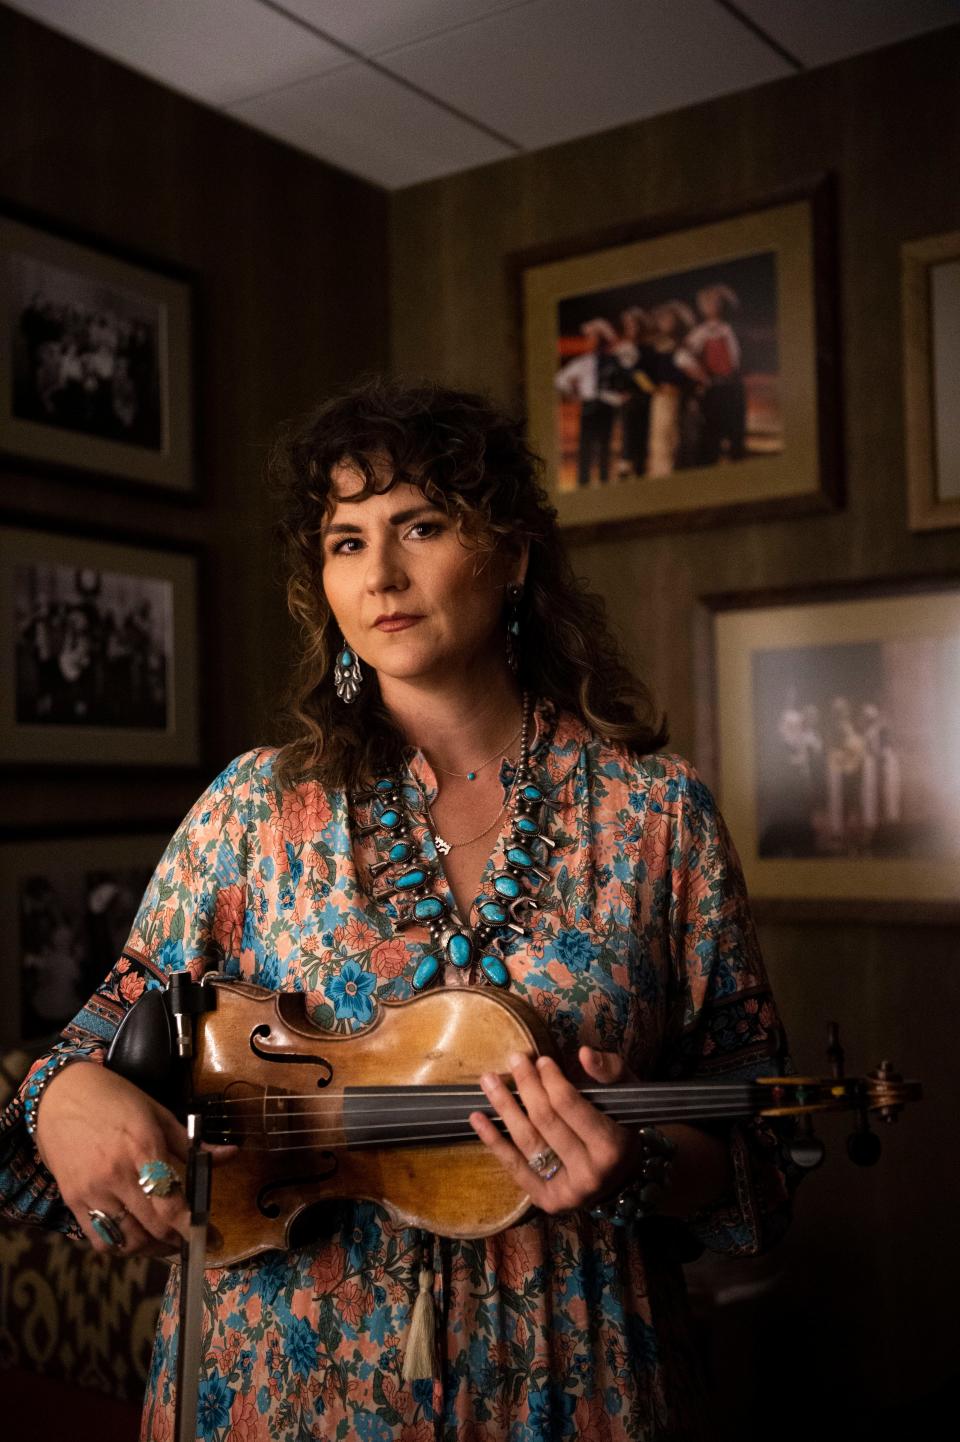 Fiddle player Jenee Fleenor of the Wood Box Heroes is a four-time Country Music Association Musician of the Year.